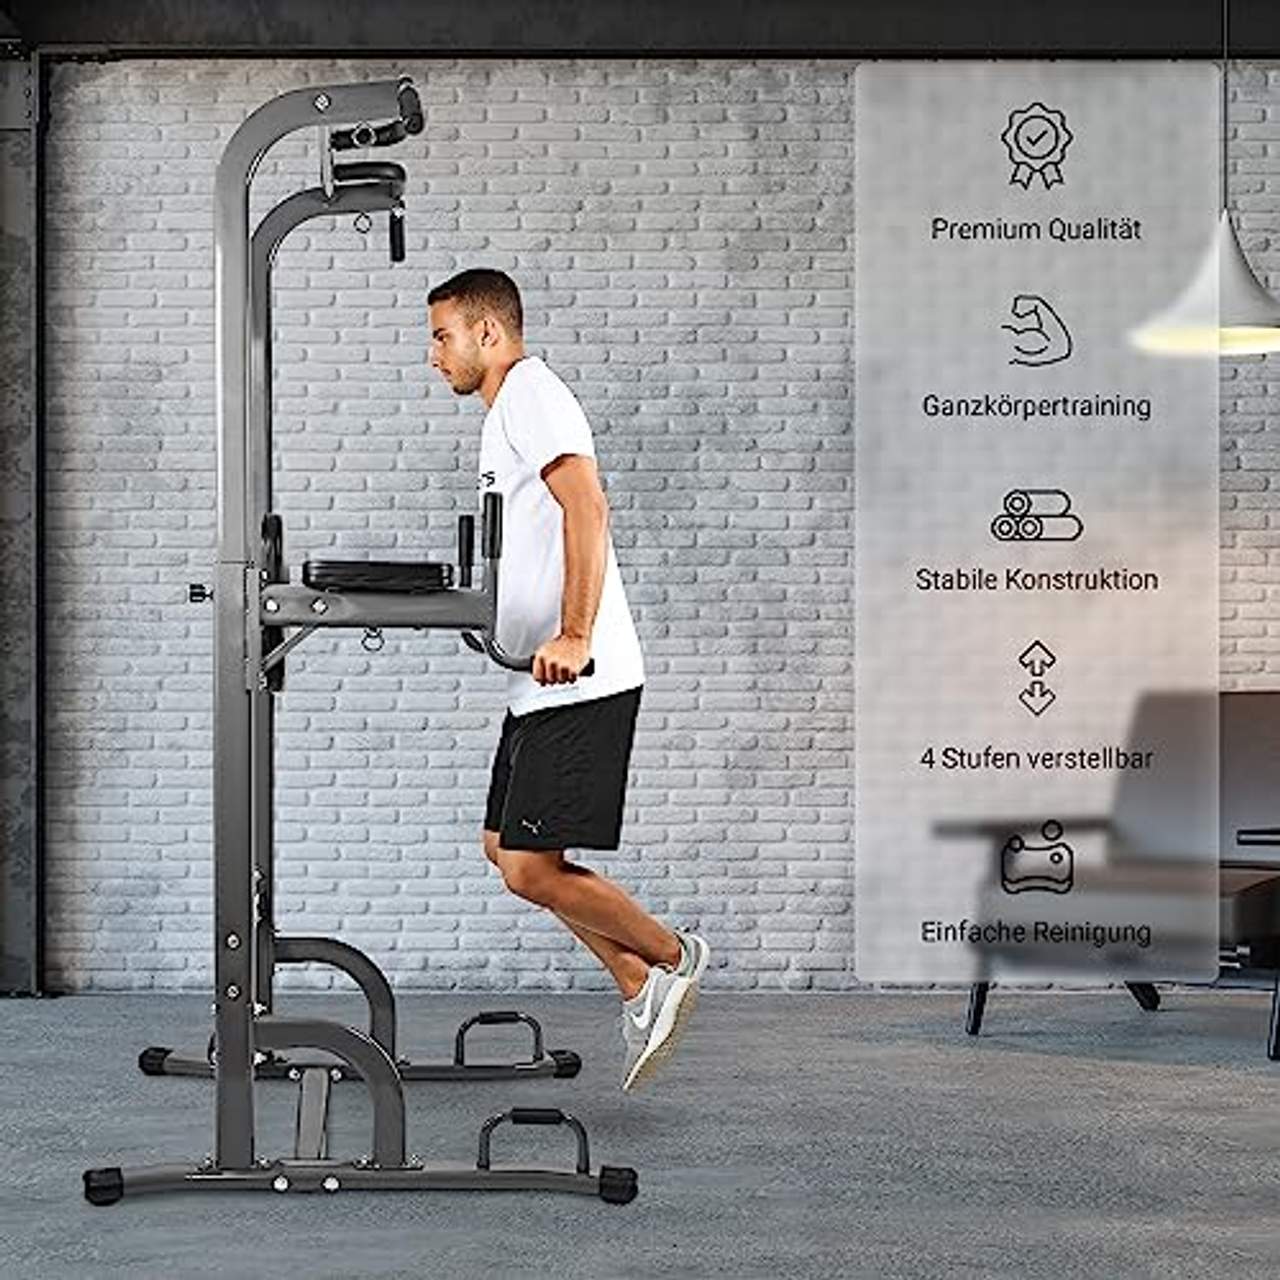 MSPORTS Power Tower 7in1 